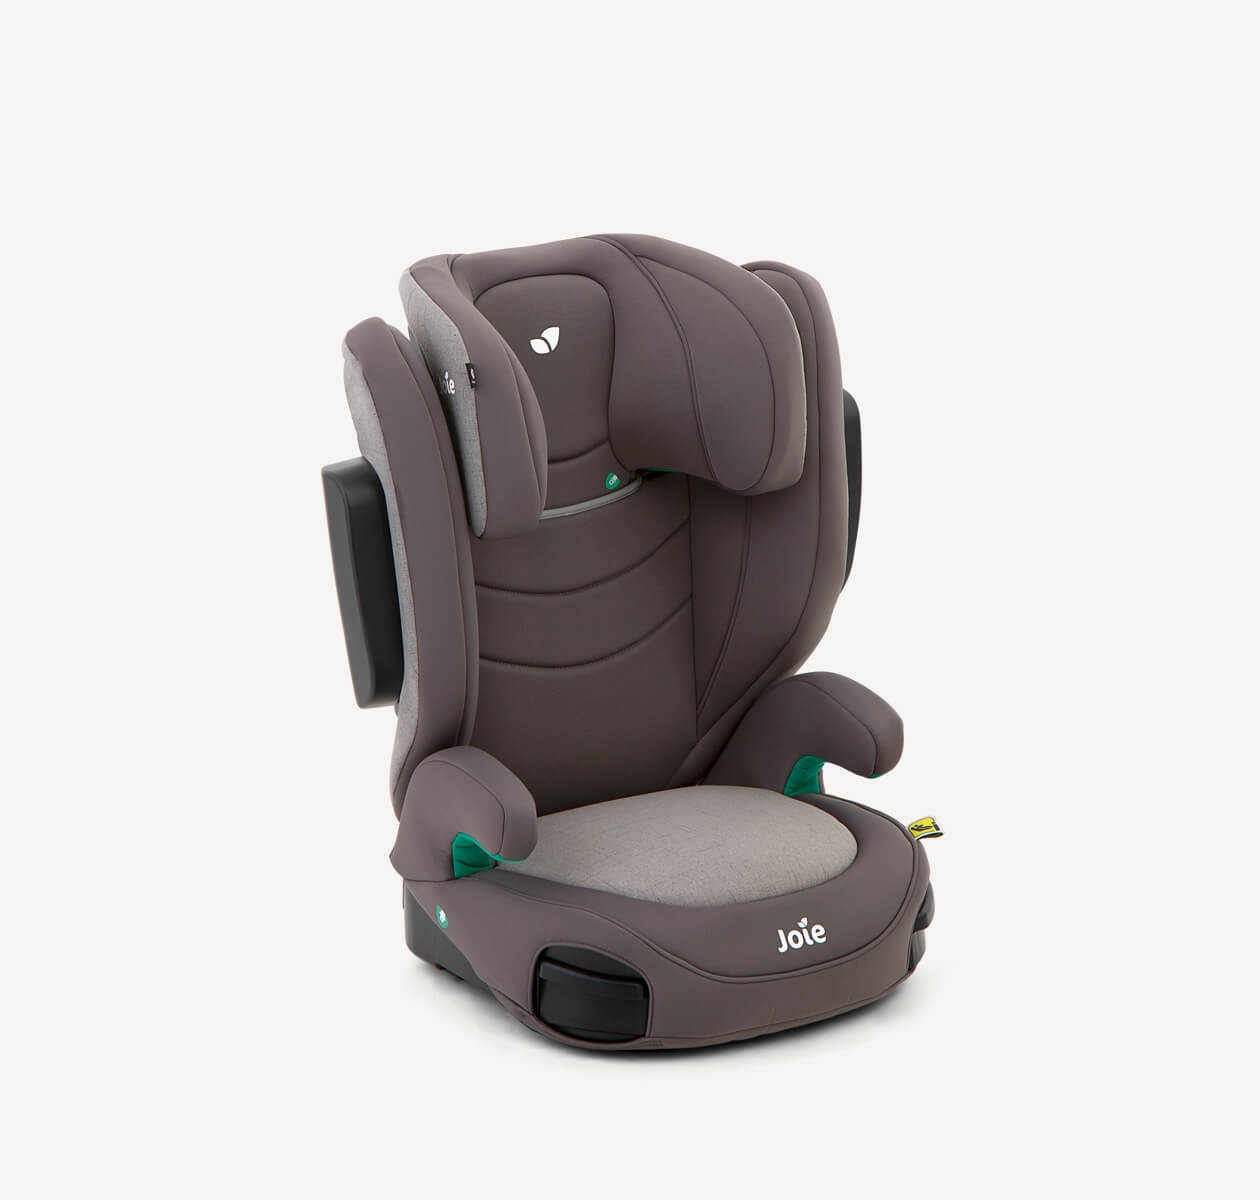 https://dd.joiebaby.com/media/catalog/product/p/1/p1-joie-booster-seat-itrillolx-dark-pewter-right-angle.jpg?type=product&height=265&width=265